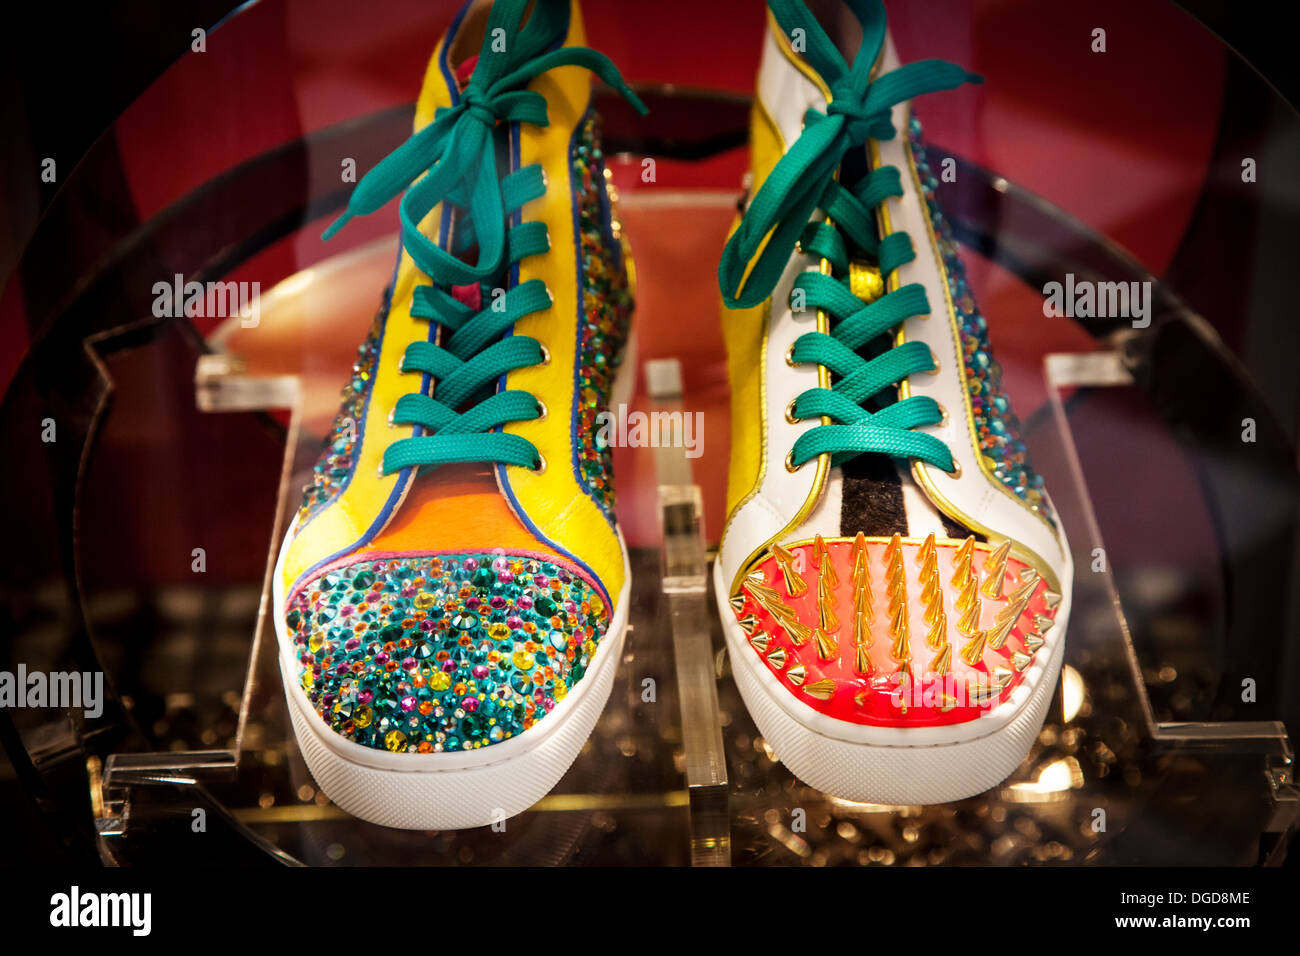 Christian Louboutin shoes on display at the designers store inside Galerie  Vero Dodat, Paris, France Stock Photo - Alamy